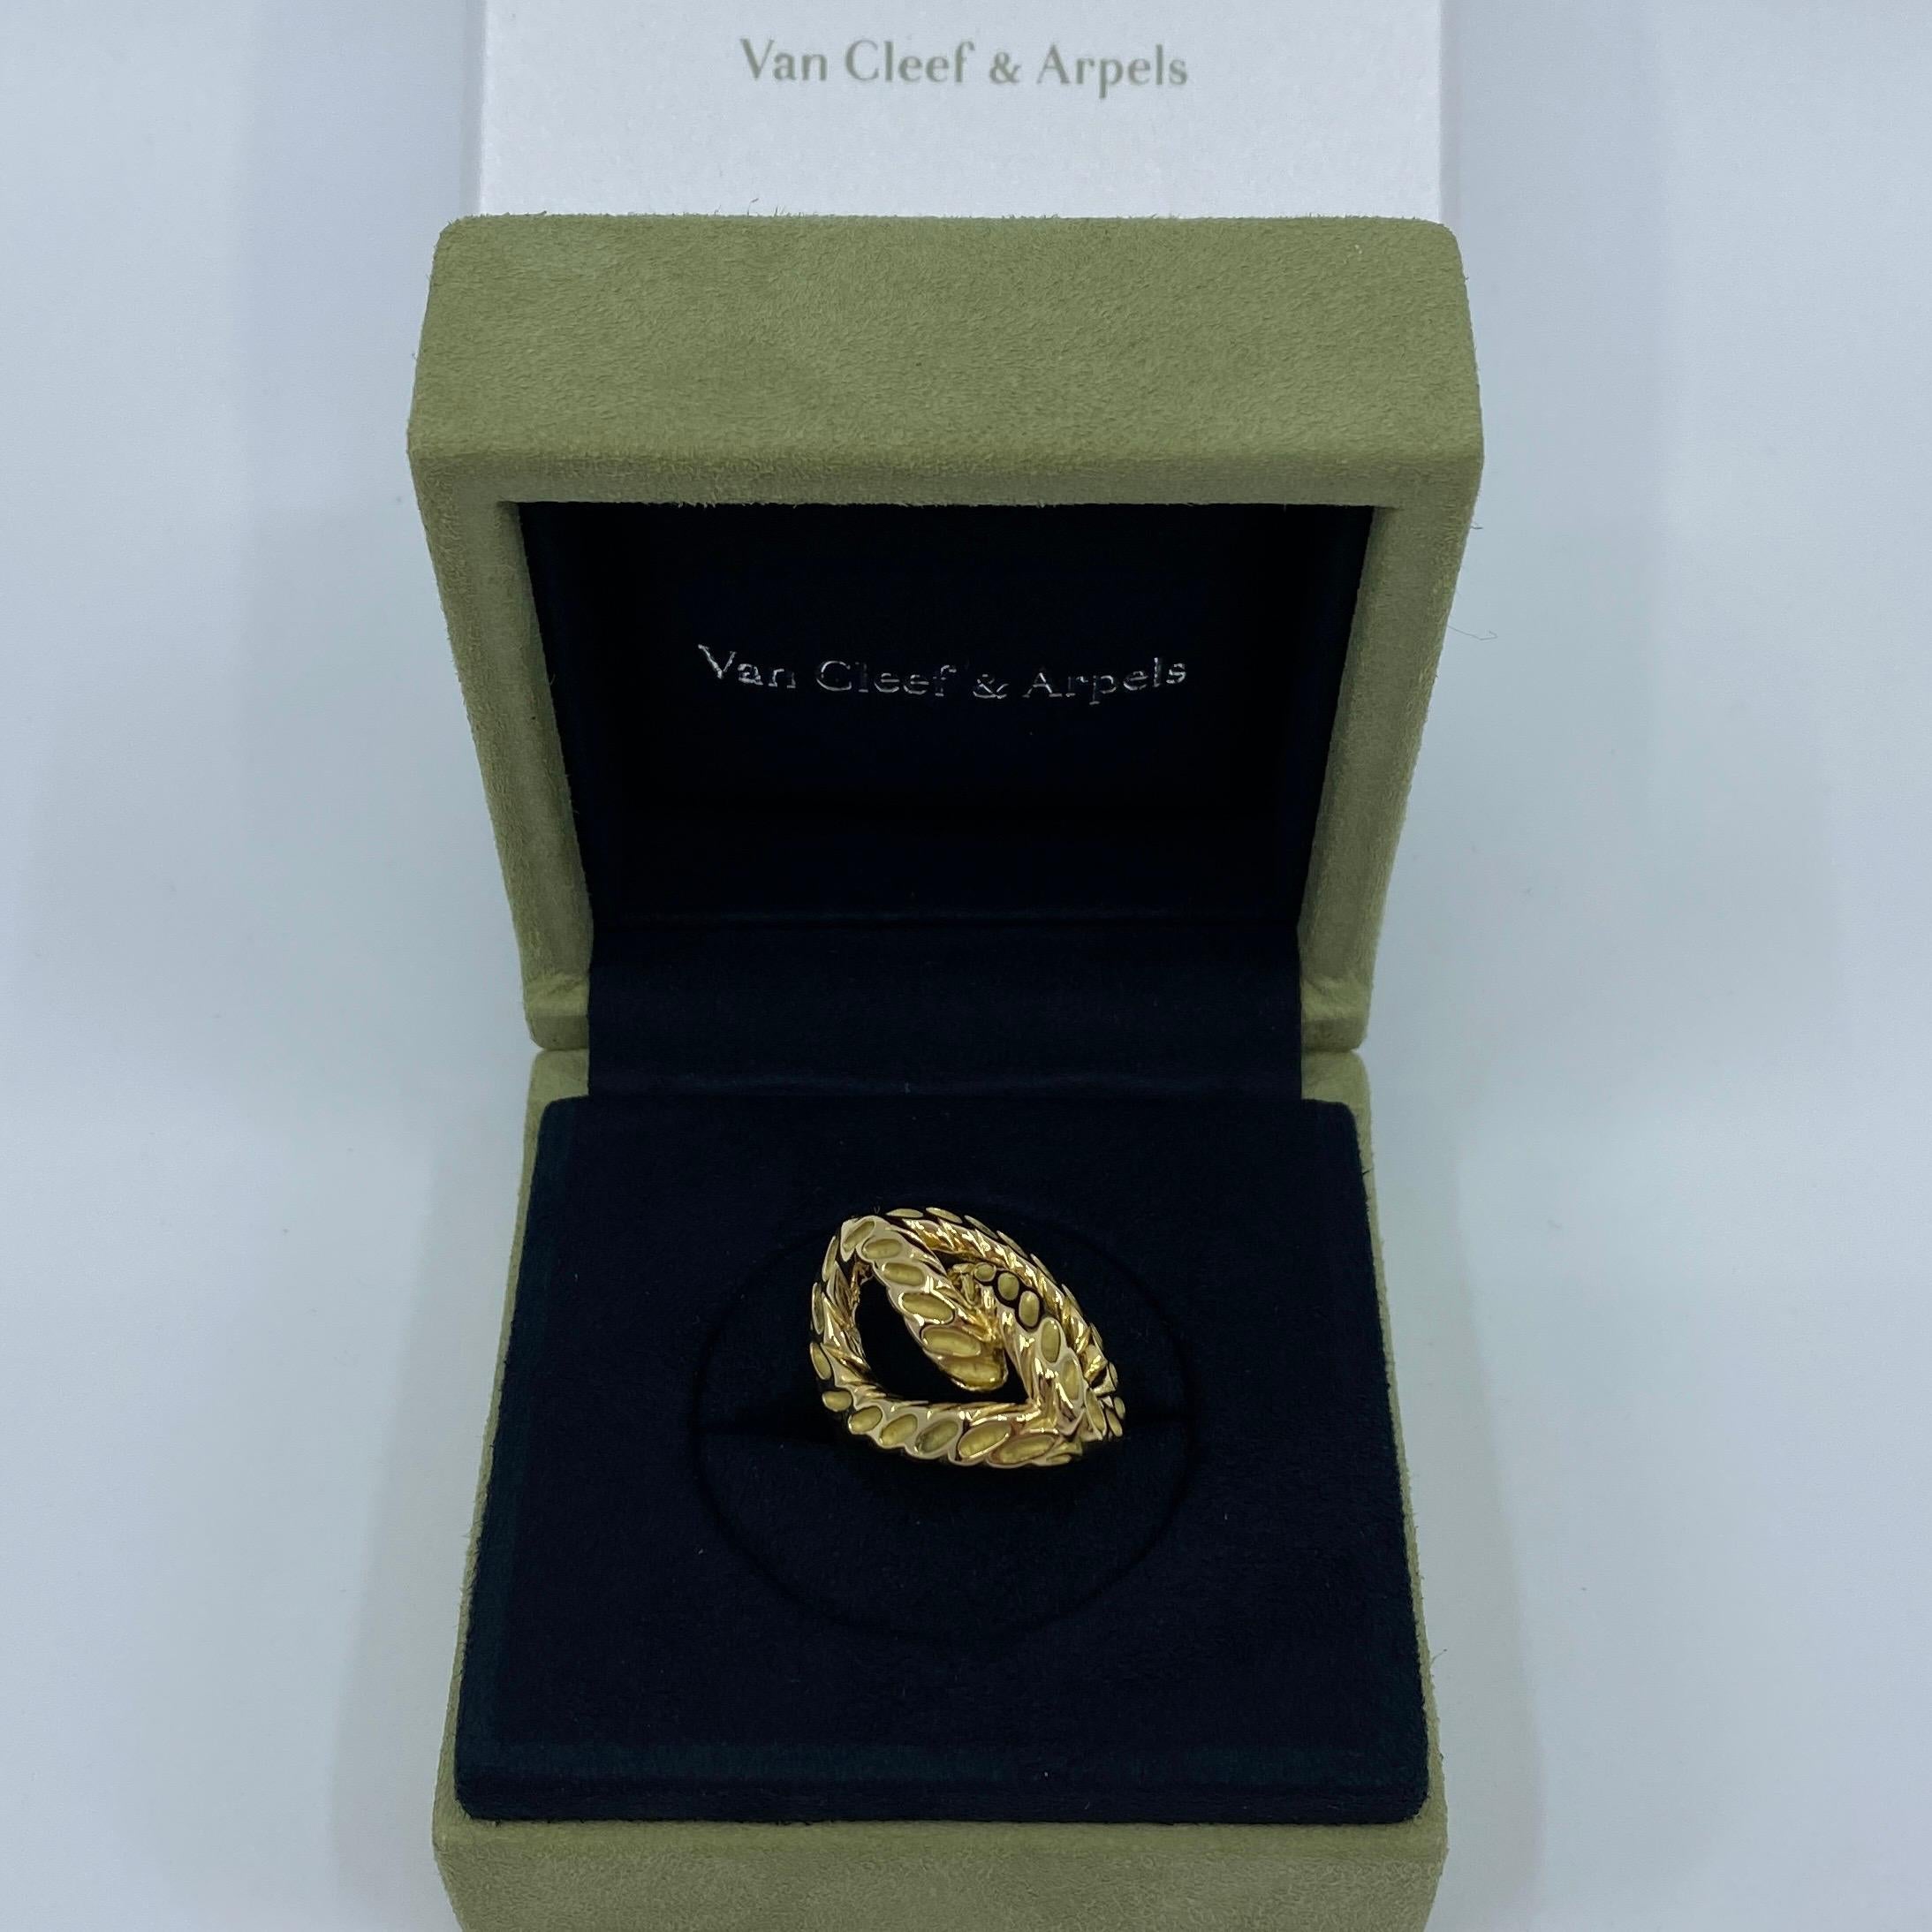 Rare Vintage Van Cleef & Arpels 18k Yellow Gold Braid Rope Motif Ring with Box For Sale 3